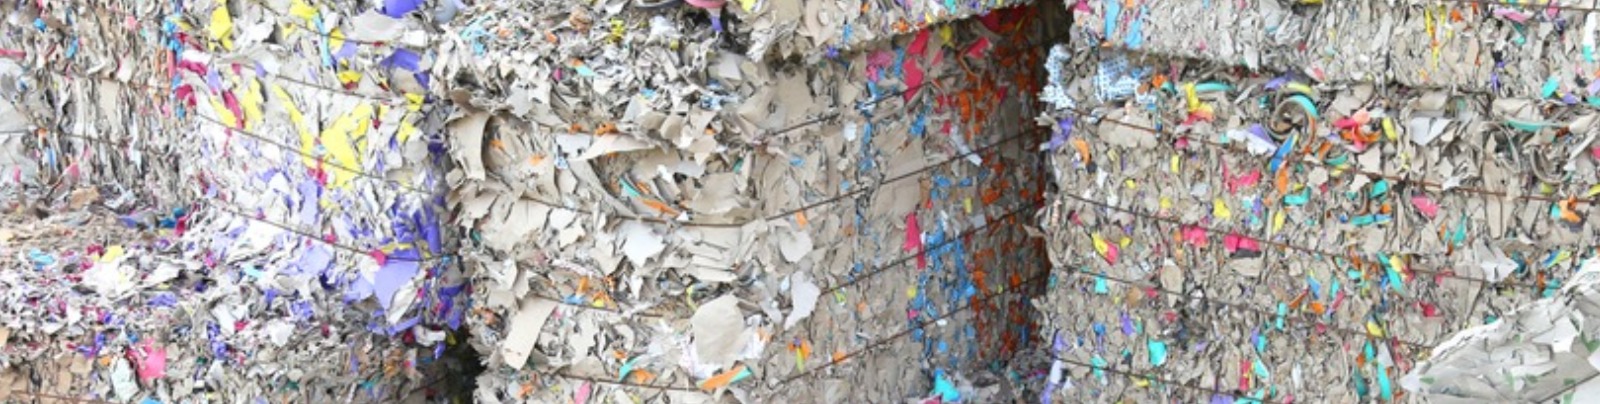 Paper - Recycling Process